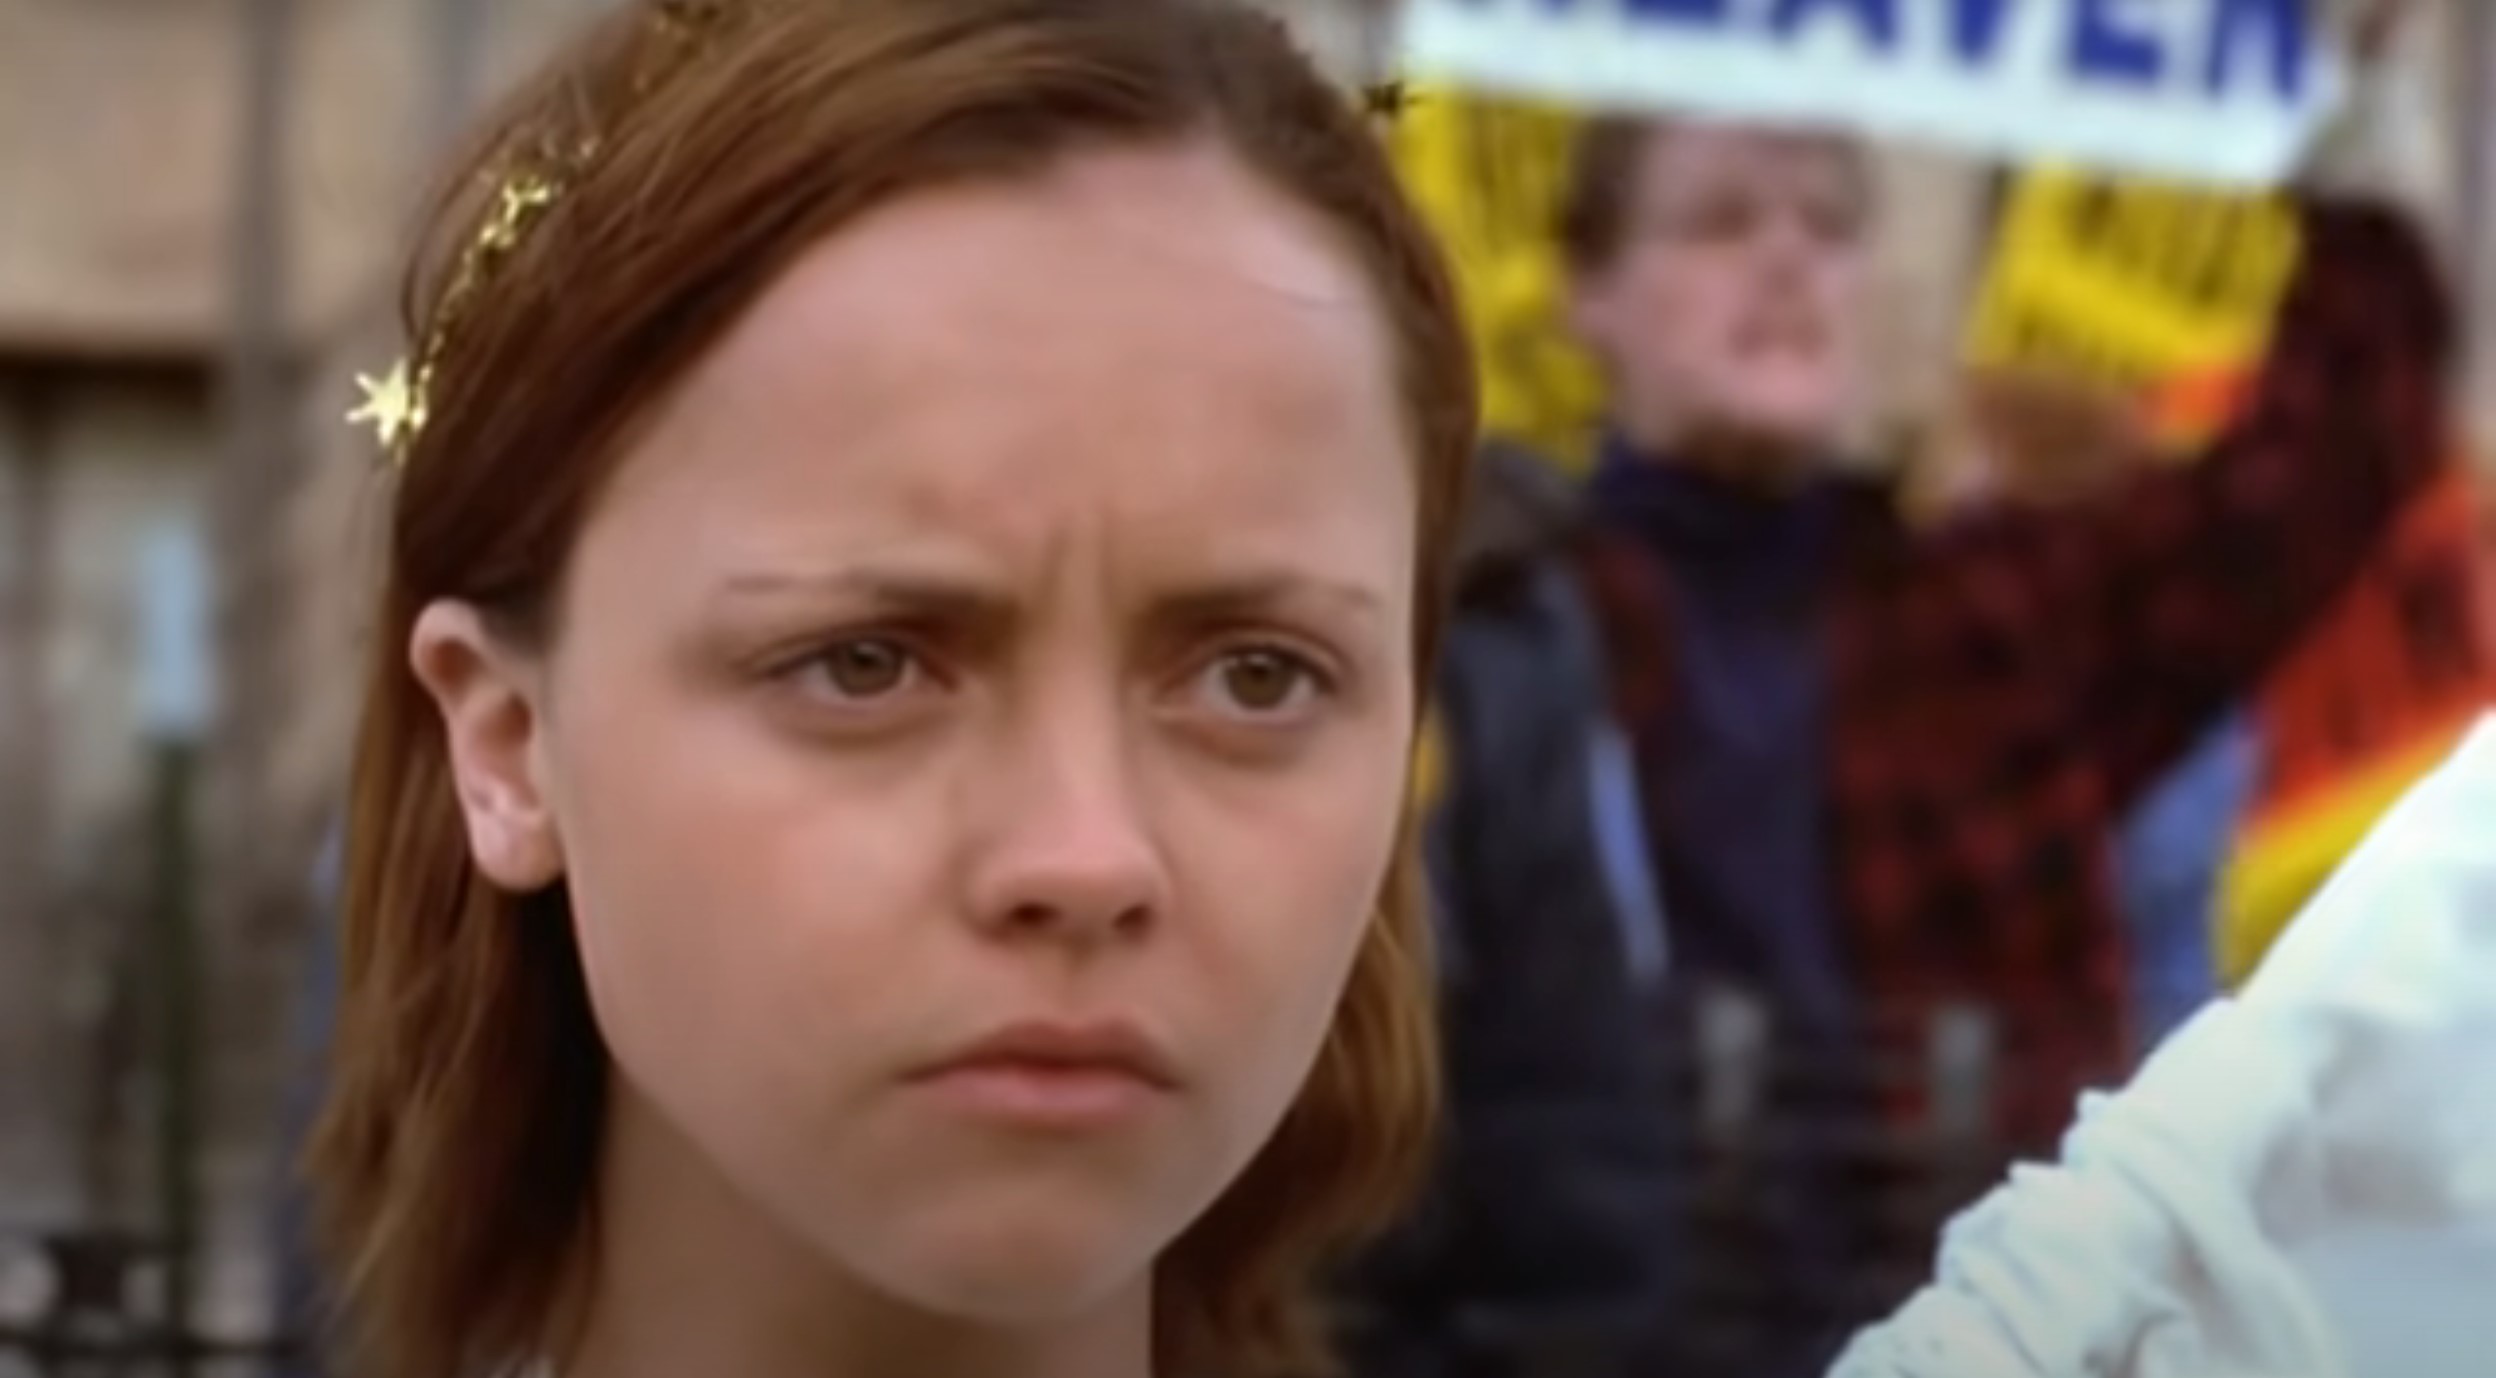 Christina Ricci in 'The Laramie Project' (HBO). It's a close-up of her face, looking concerned. She's wearing a small star garland in her short, light-brown hair. There are angry protesters in the background.